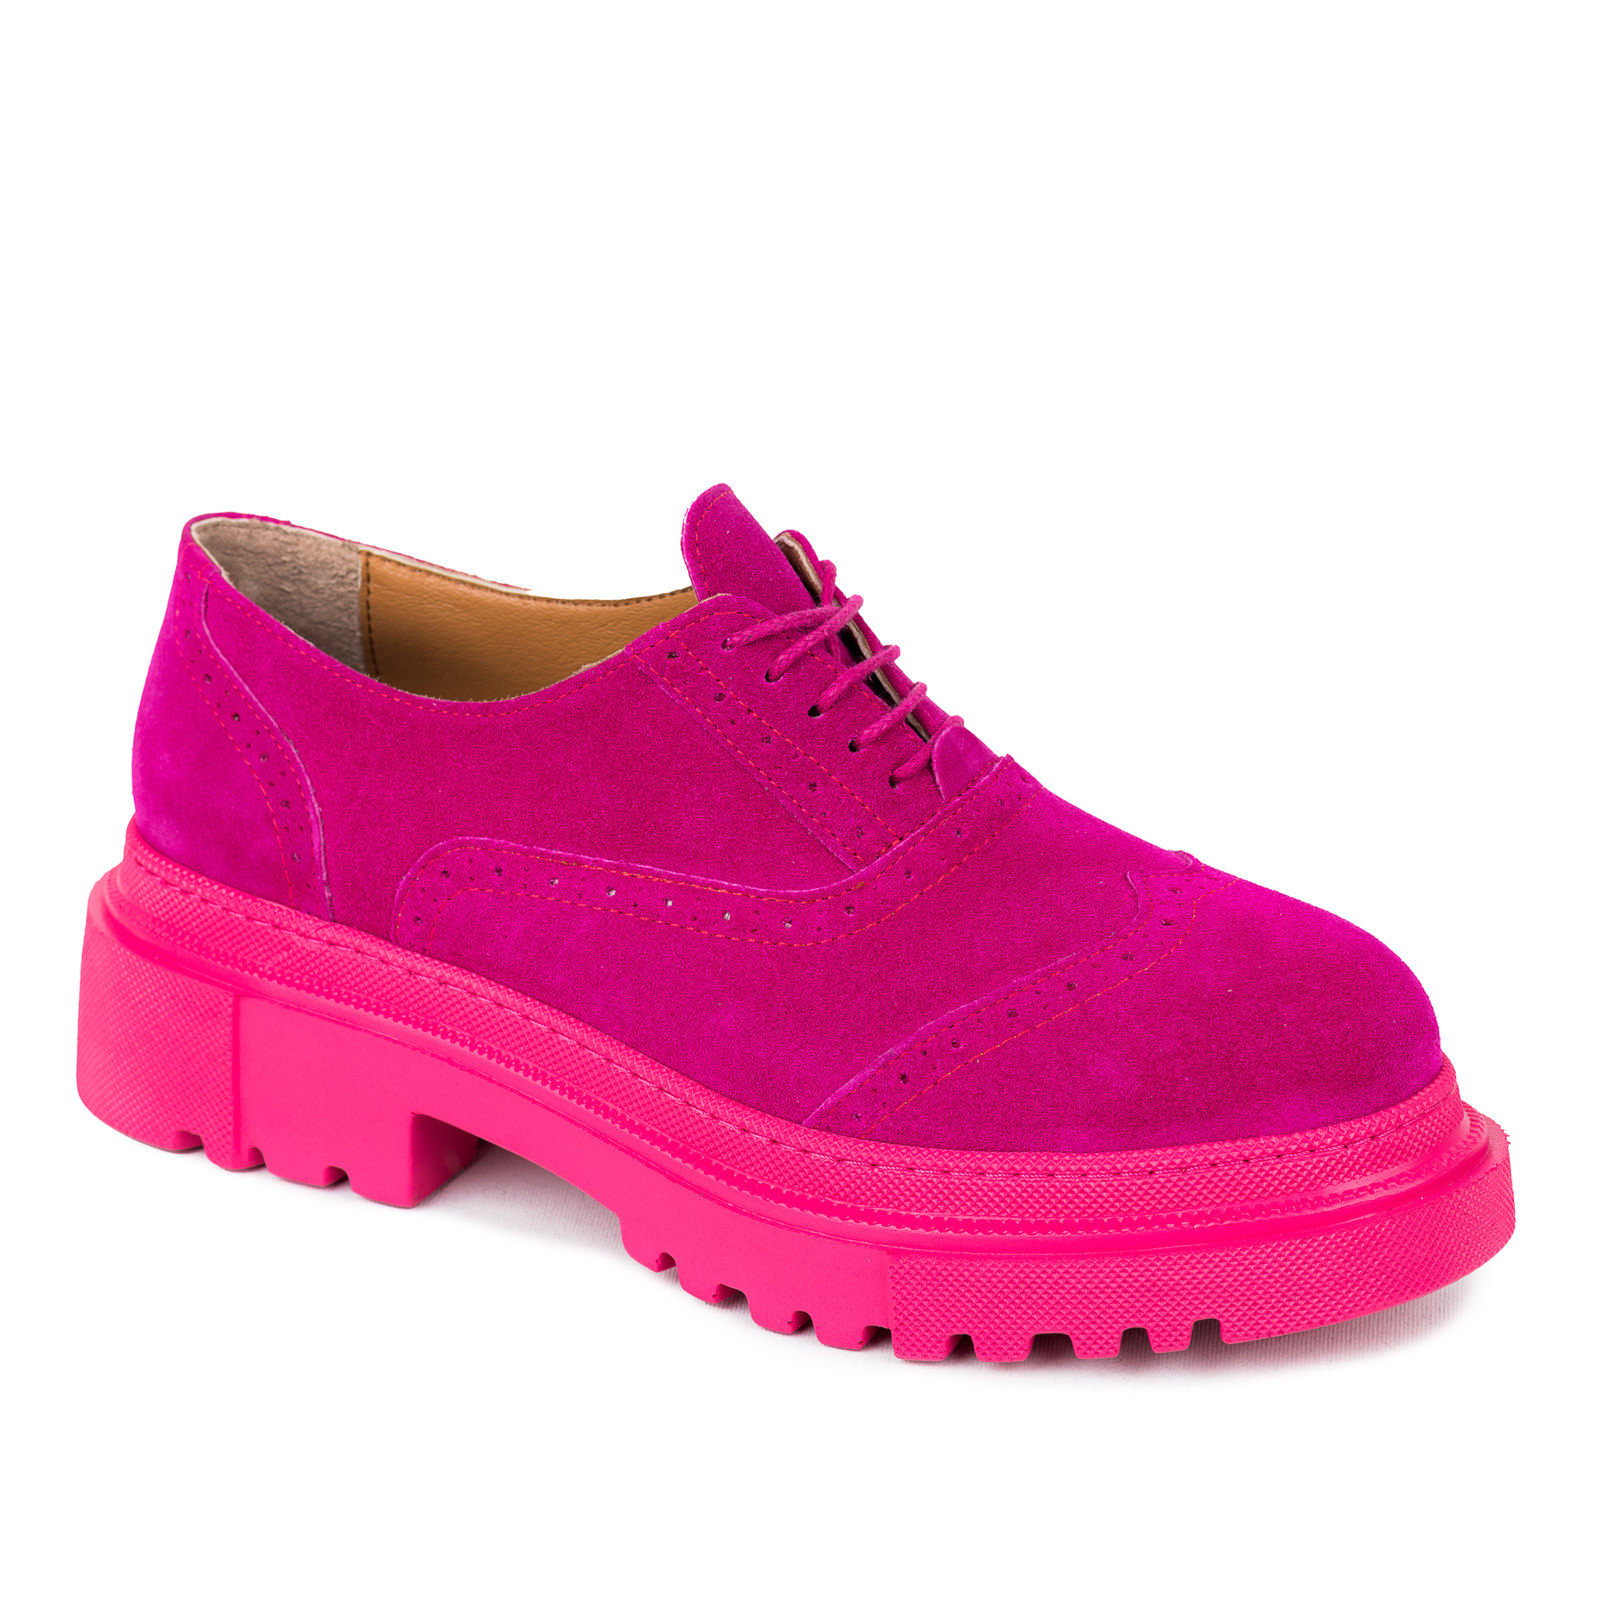 Leather shoes & flats B556 - PINK